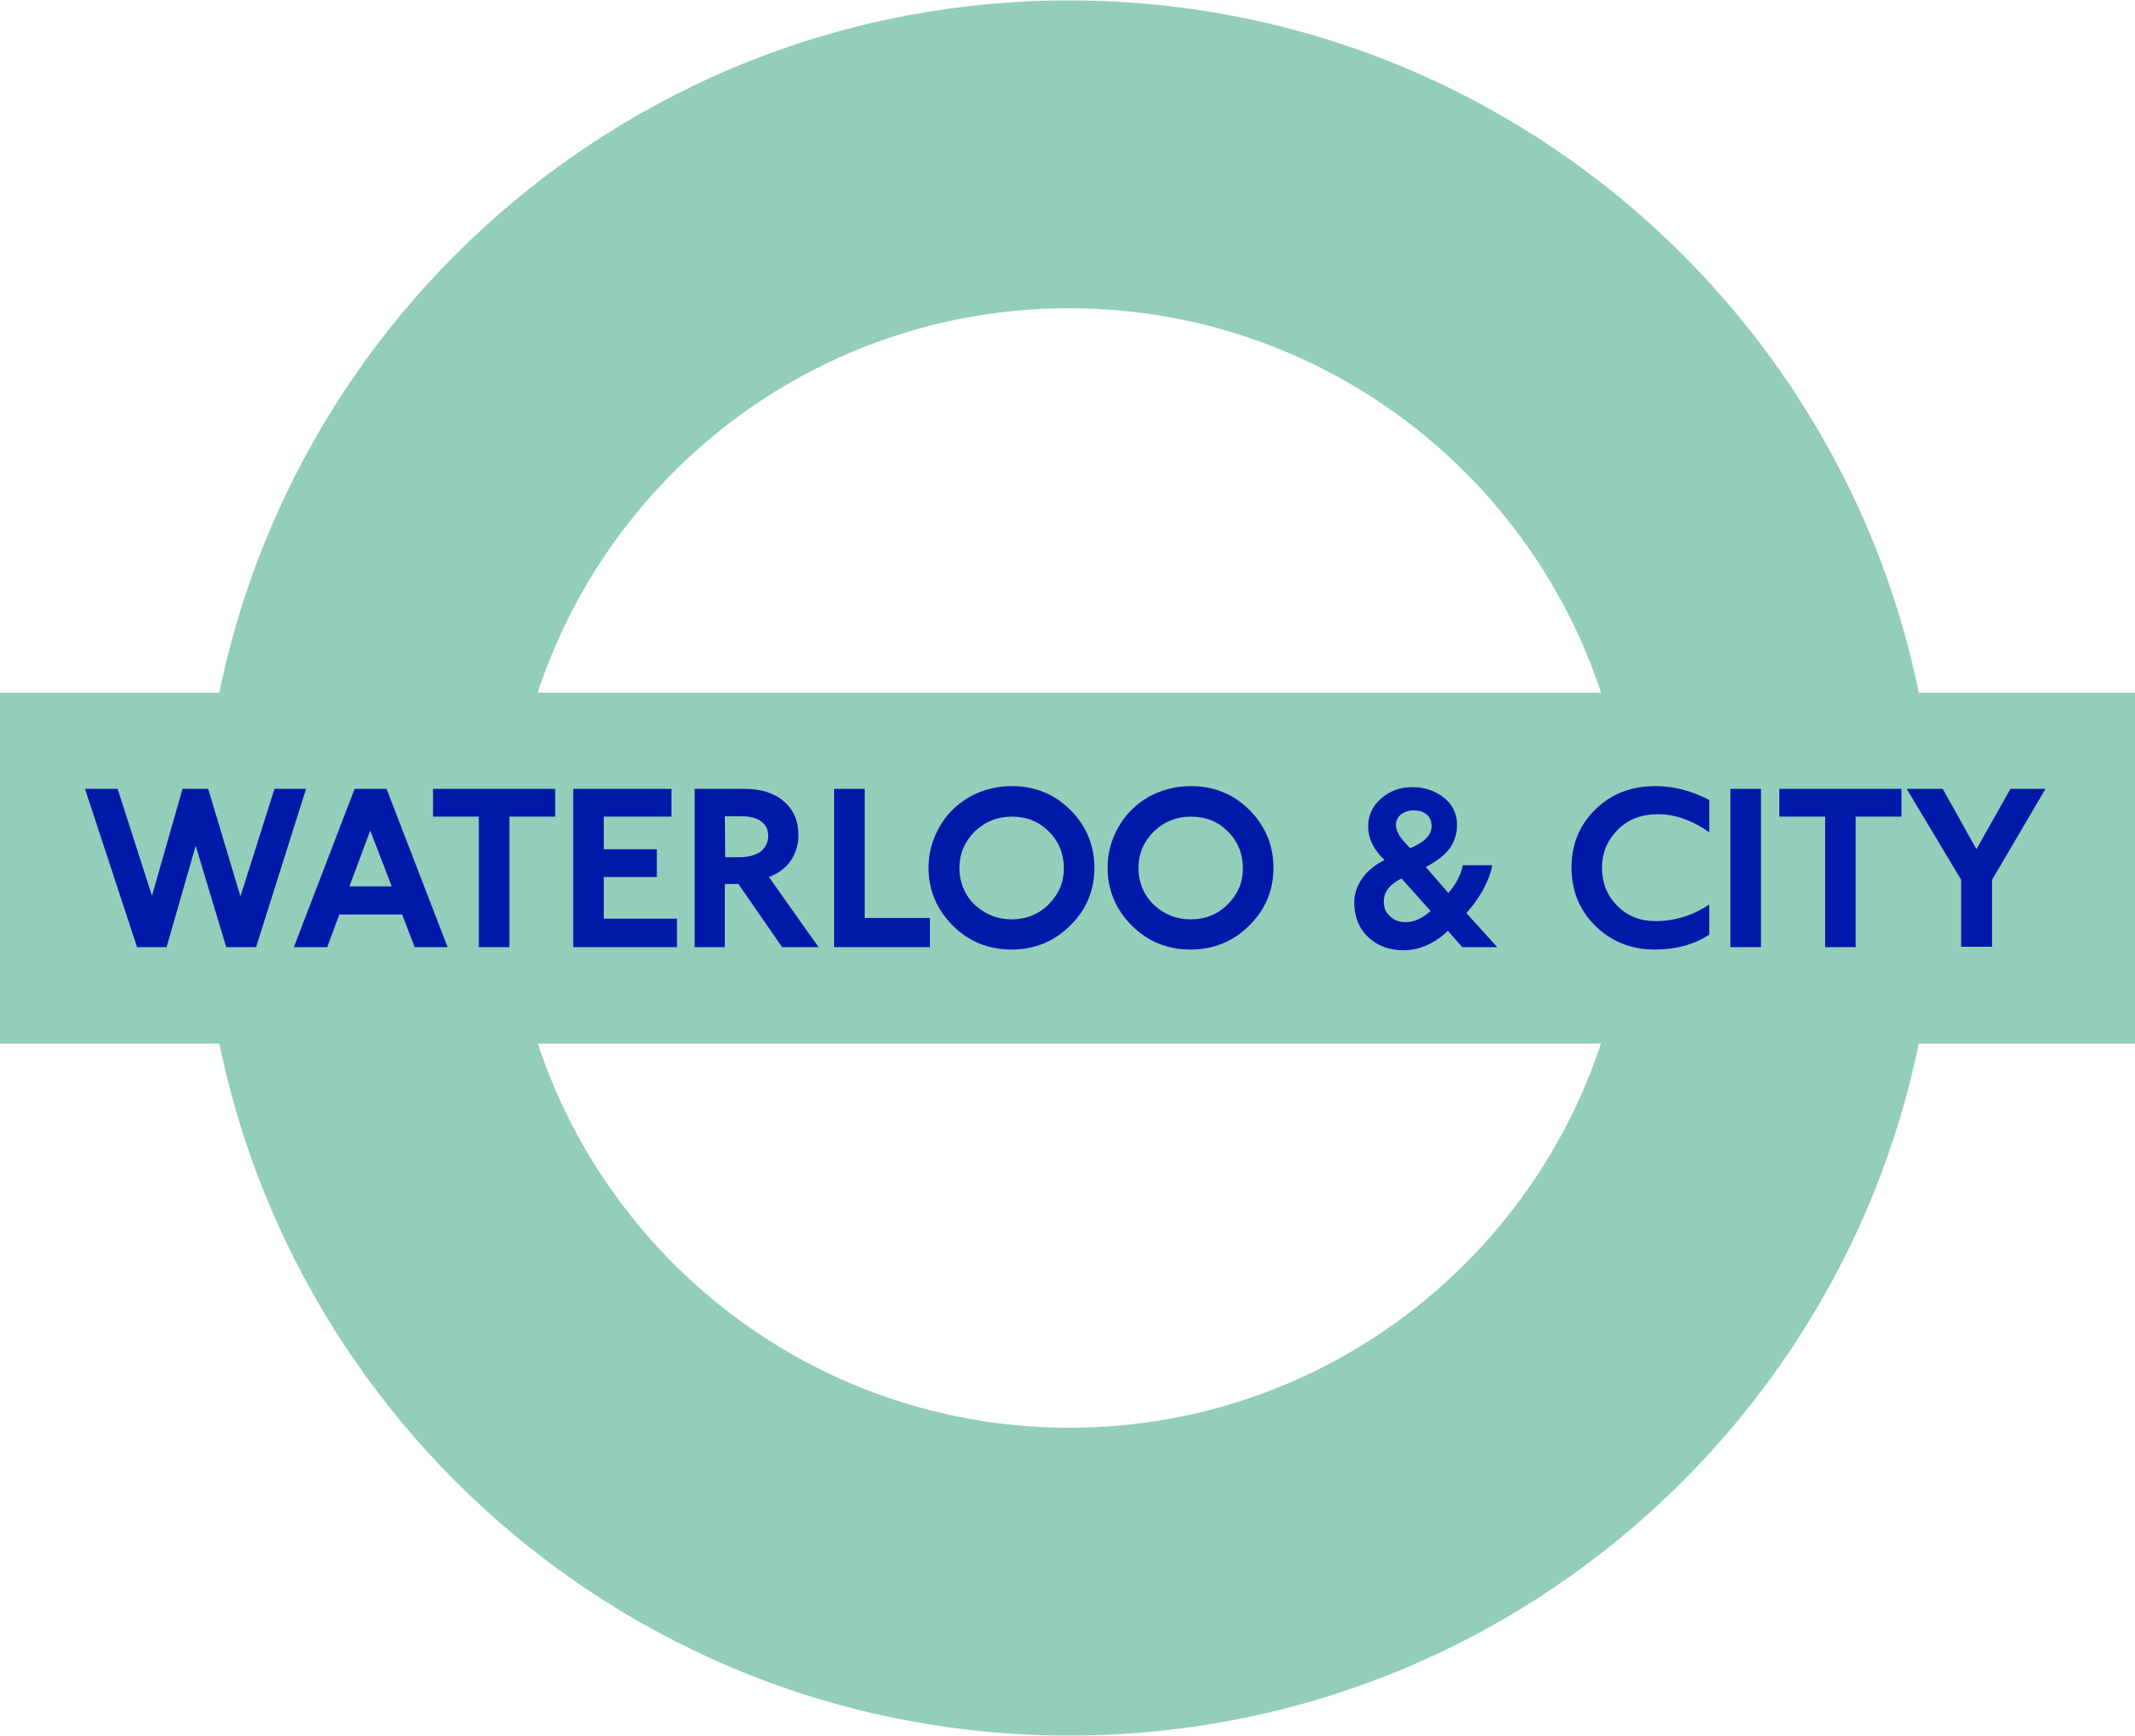 london tube lines ranked - waterloo and city